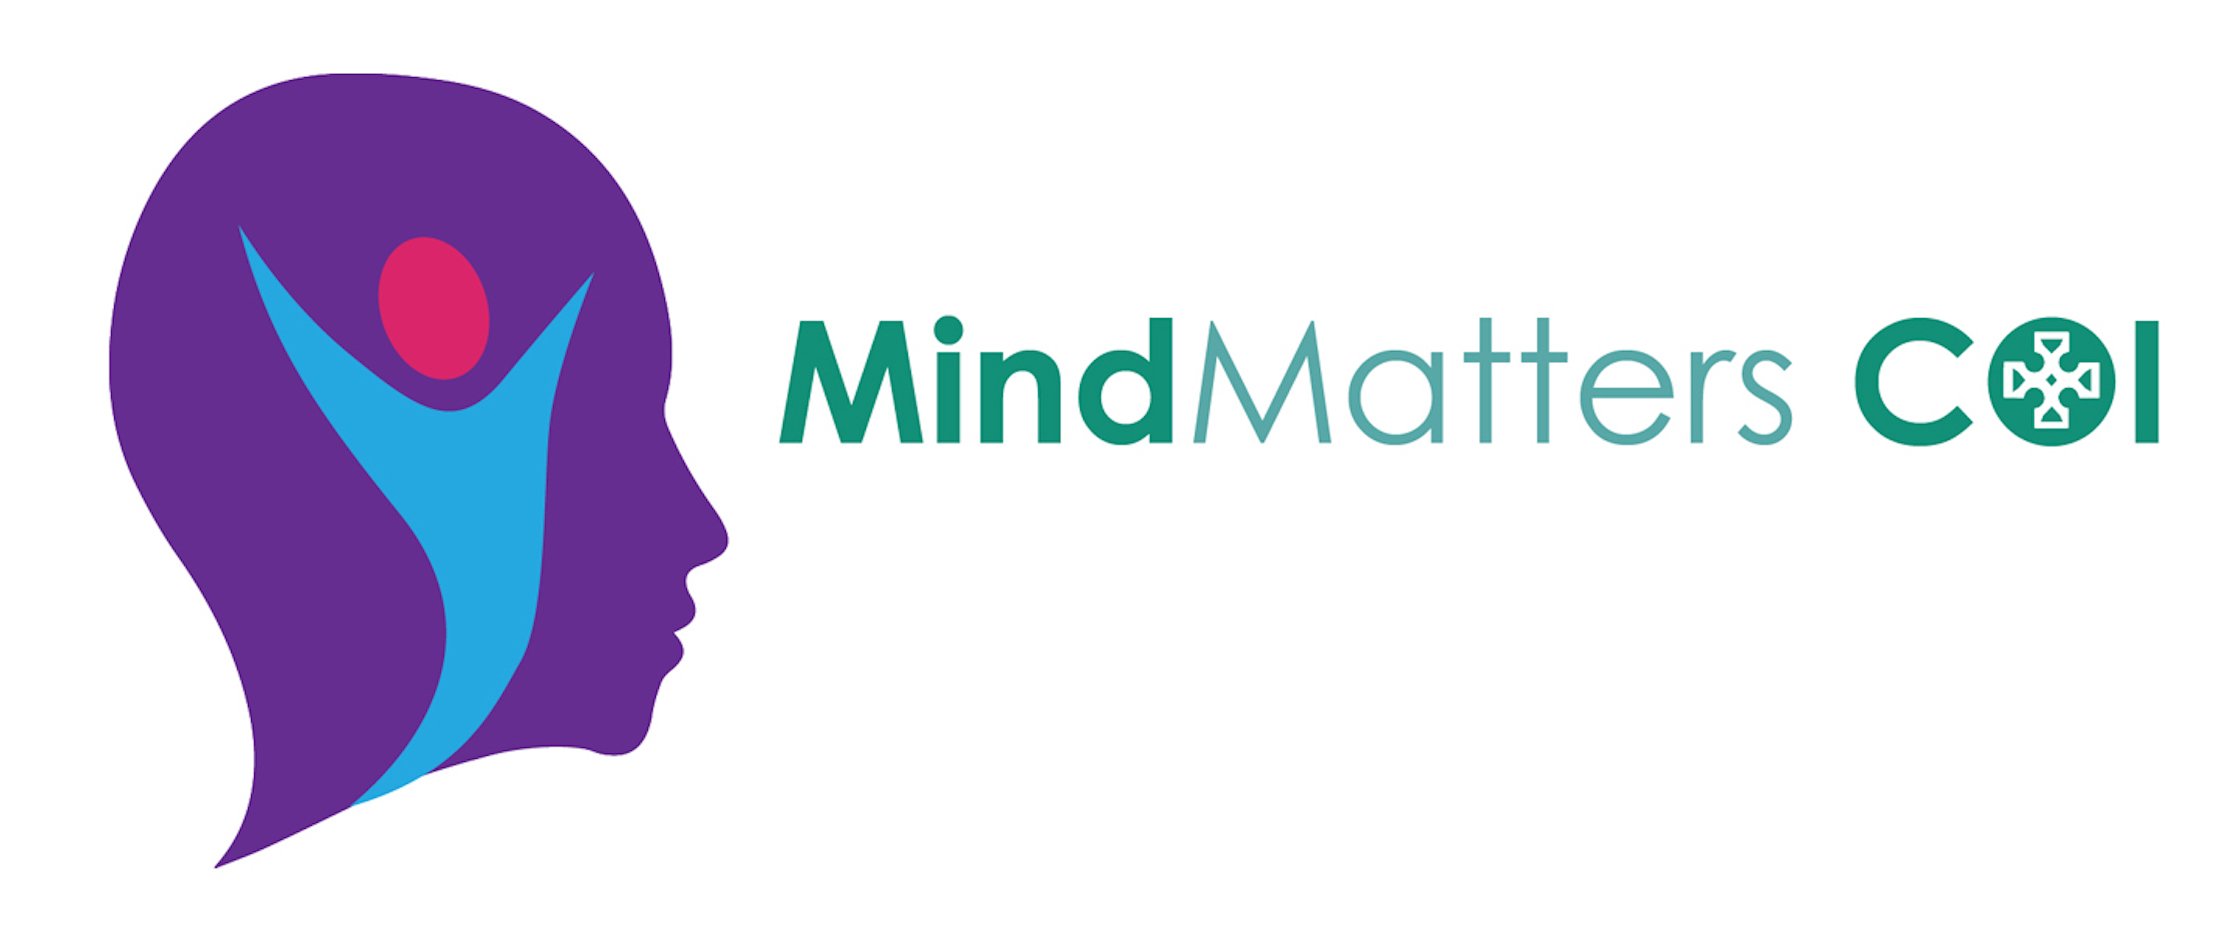 MindMatters seed funding open to applications 